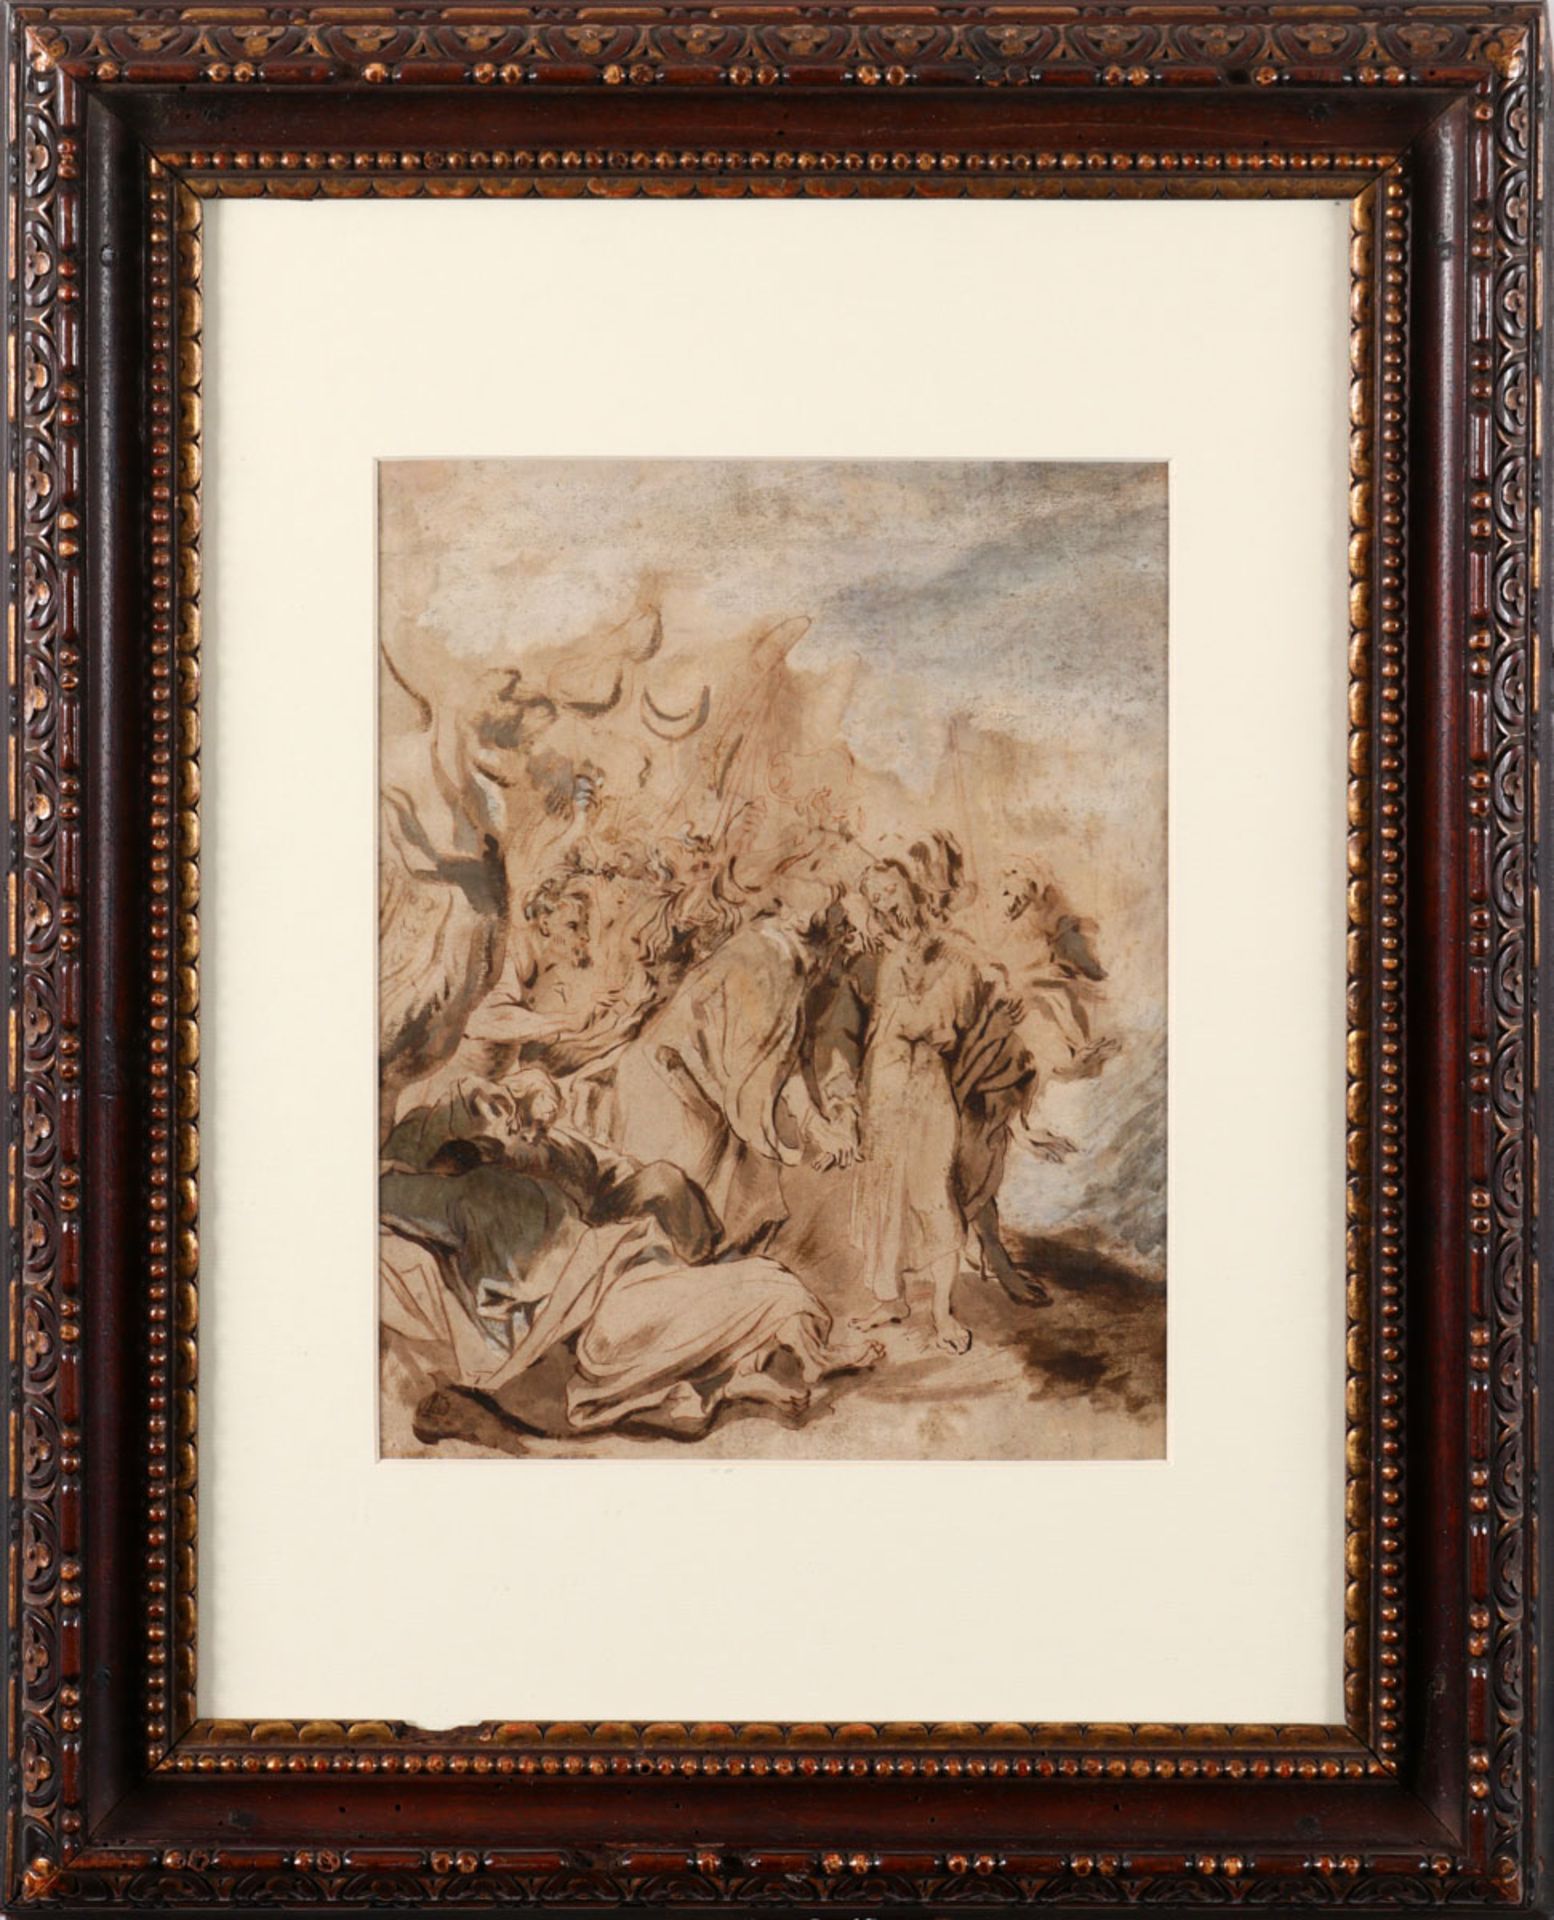 ITALIAN SCHOOL (18TH CENTURY), CHRIST HEALING THE SICK Ink and wash on paper. Carved walnut frame,